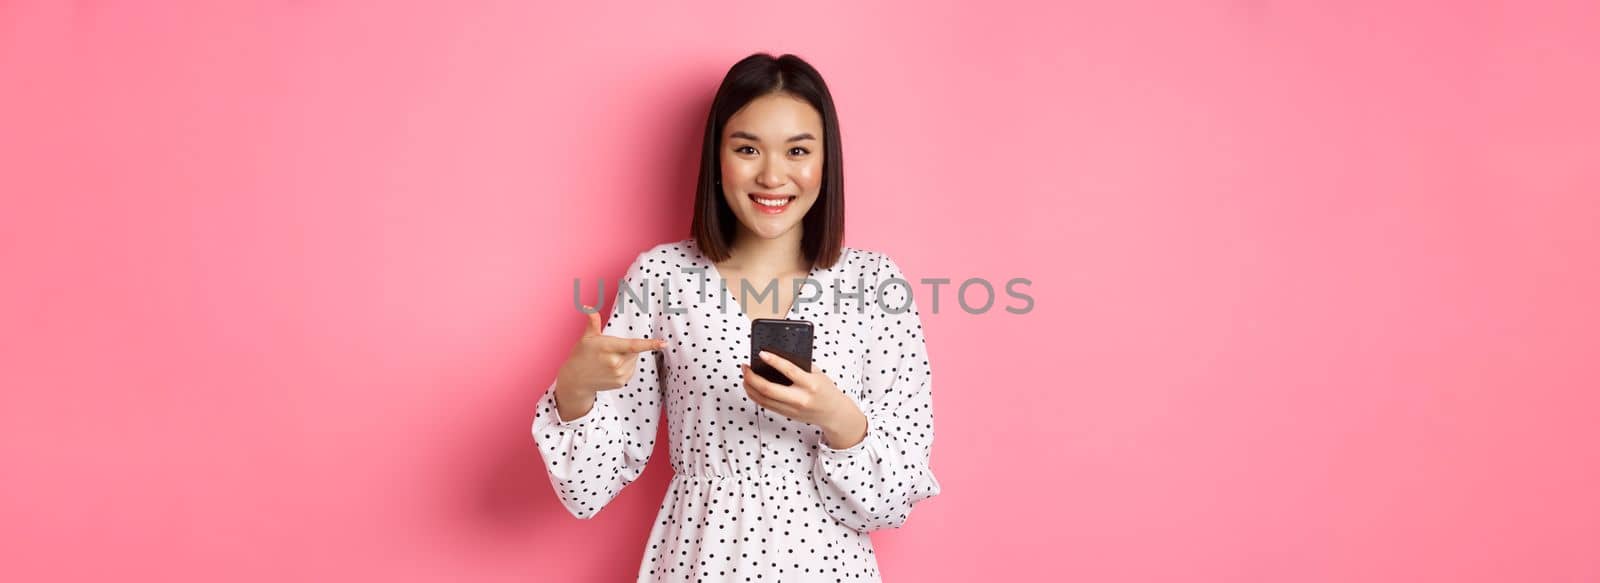 Beautiful young asian woman in romantic dress using smartphone, smiling and pointing at mobile phone, standing over pink background.